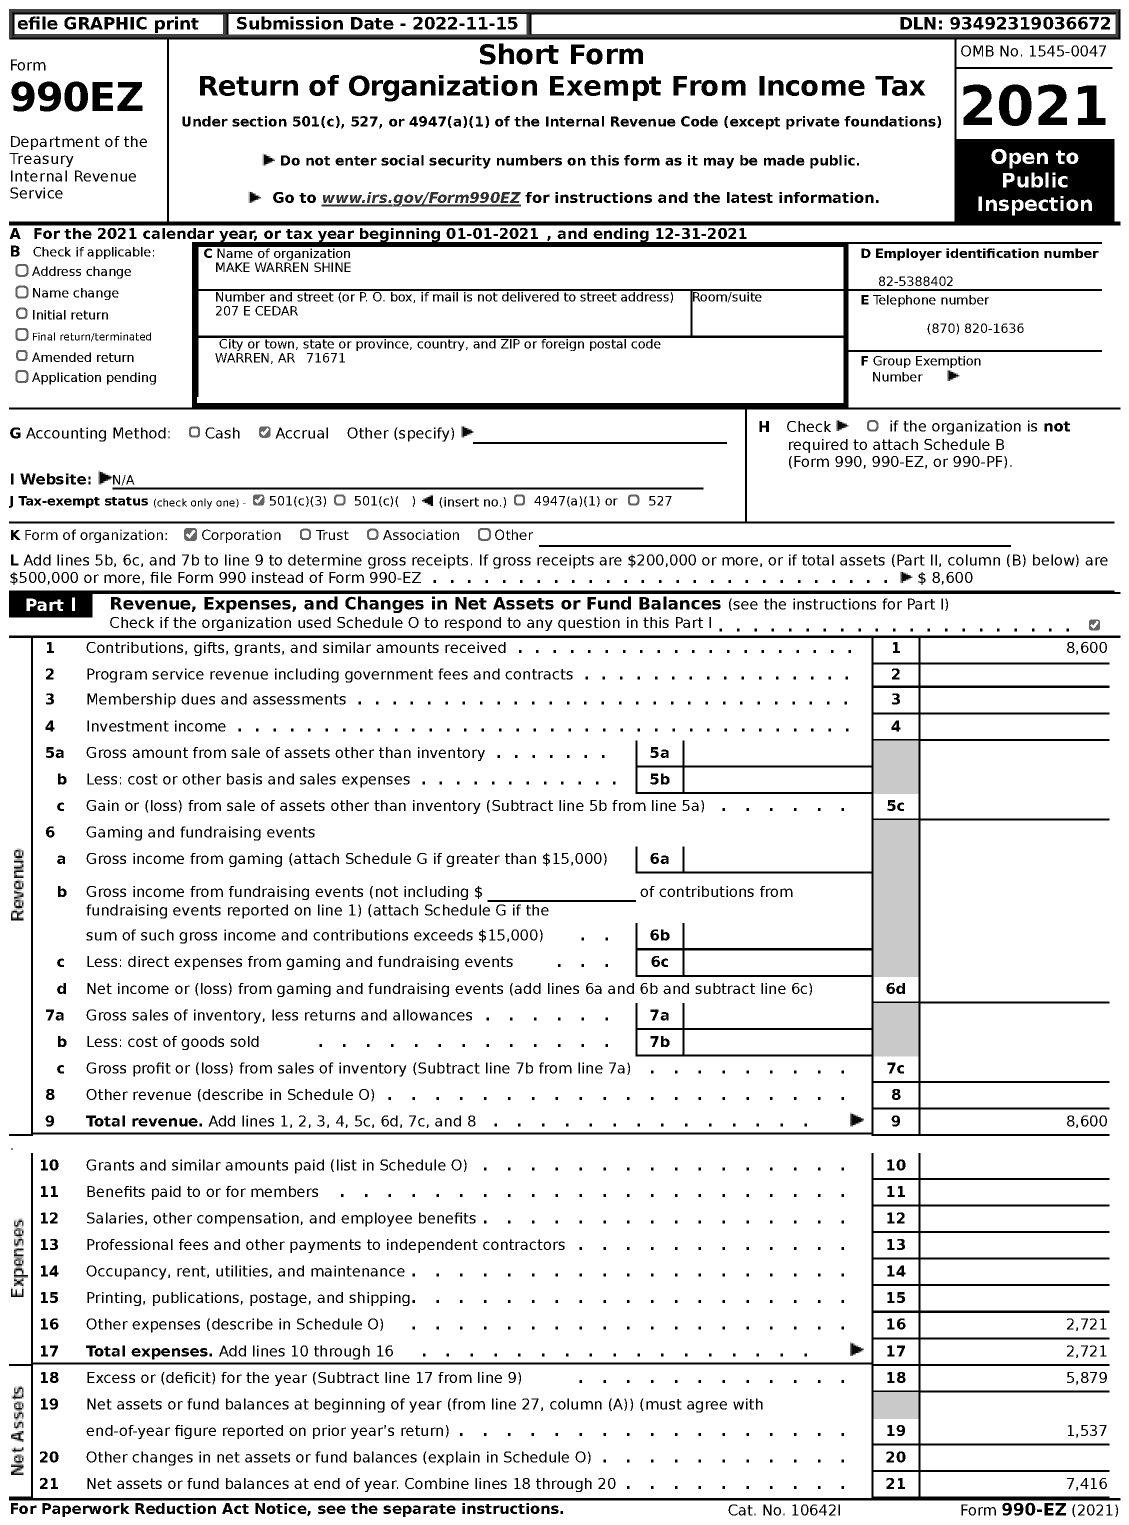 Image of first page of 2021 Form 990EZ for Make Warren Shine